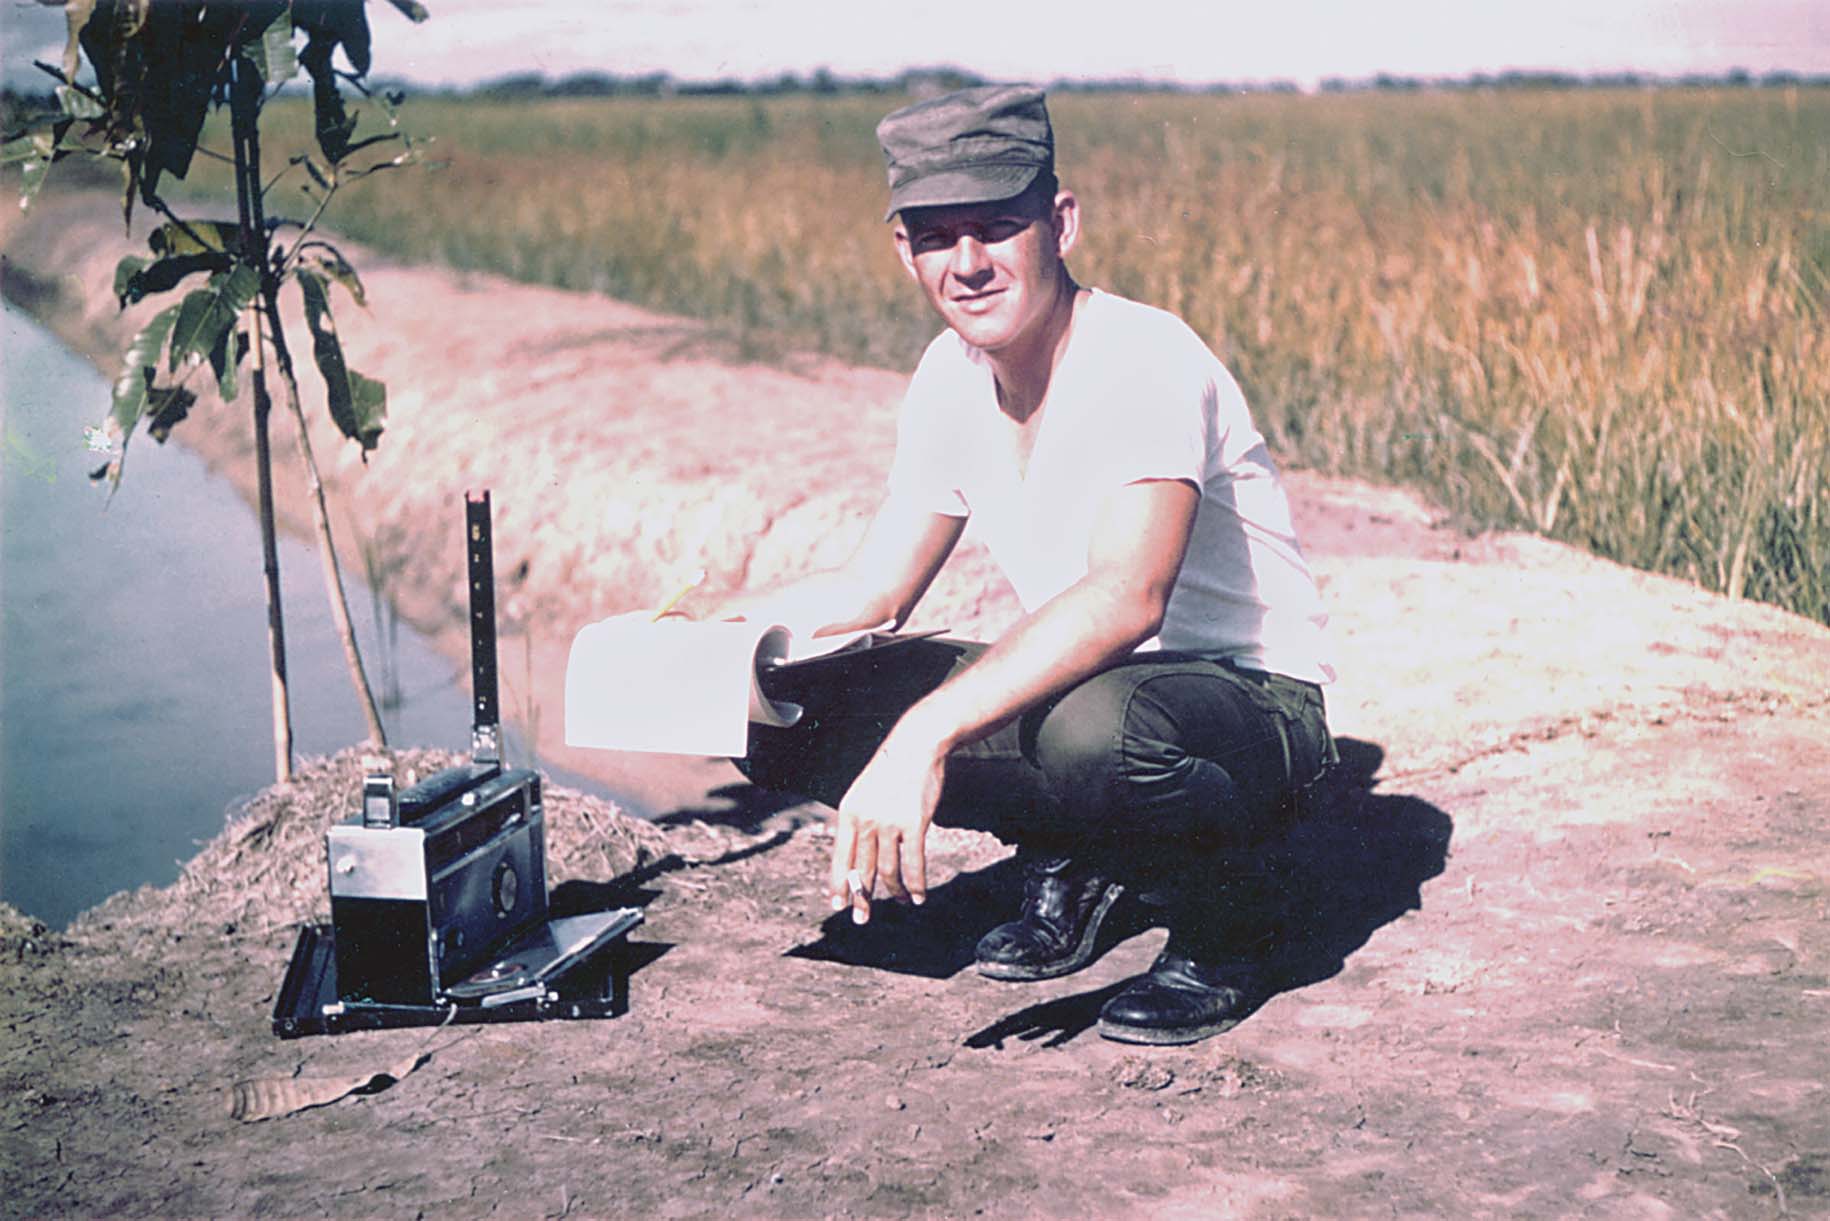 Davis is shown with radio direction finder equipment similar to that used on missions. Teams went into an area with a suspected transmitter, and when they detected a signal they used the finder to get a fix on it. / Mark D. Raab